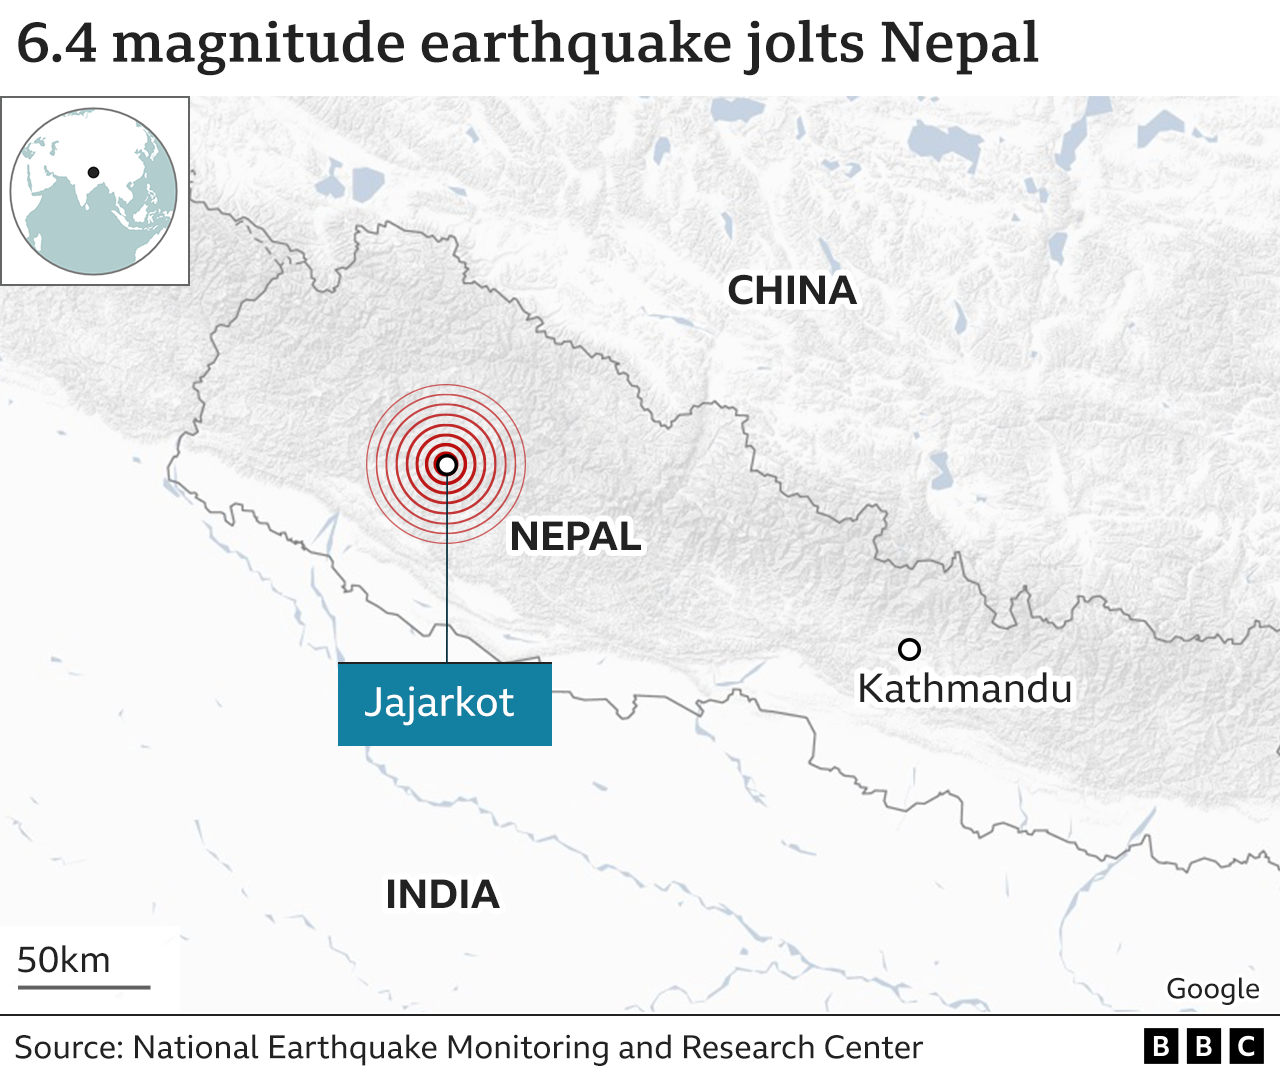 The map for Nepal earthquake on 4 November